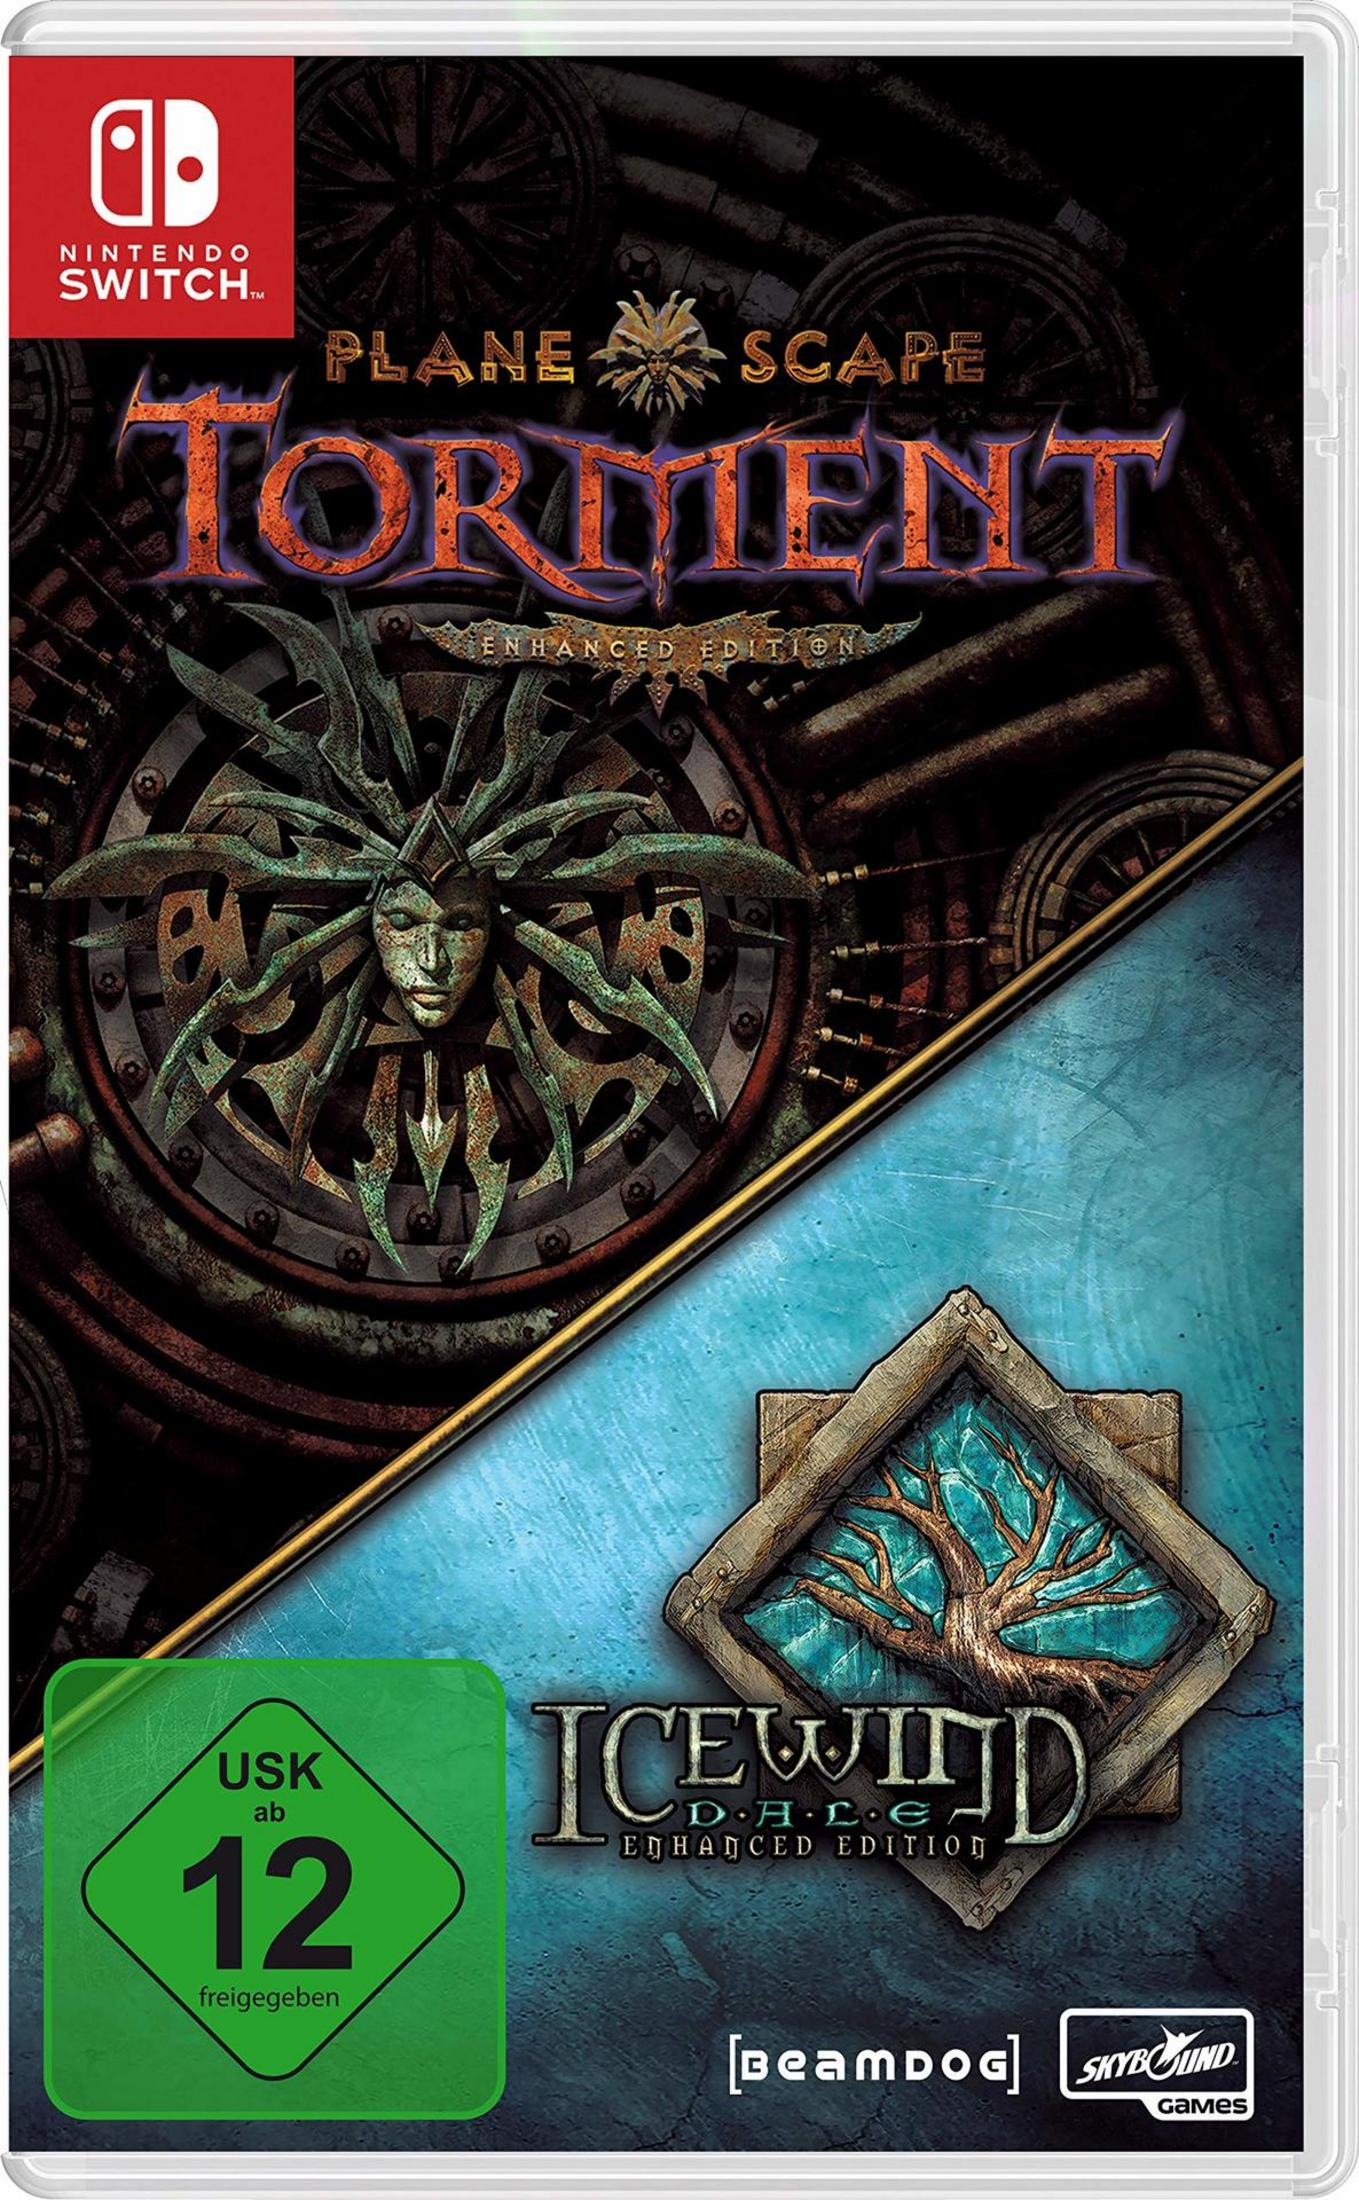 - Planescape: [Nintendo & Torment Edition Switch] Dale Enhanced Icewind